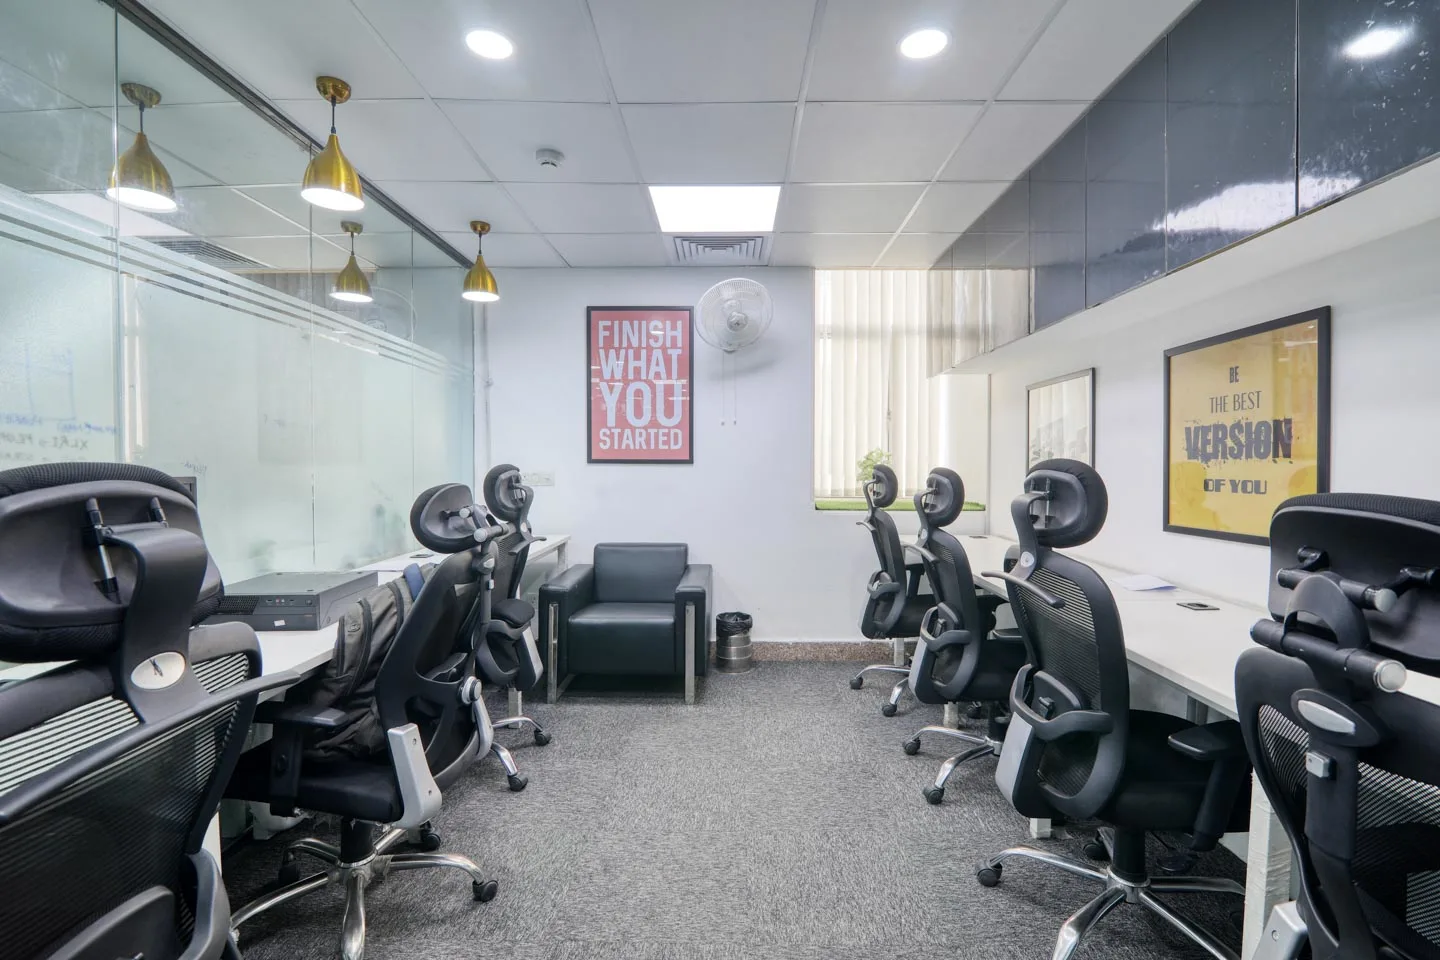 Coworking office space in Gurgaon